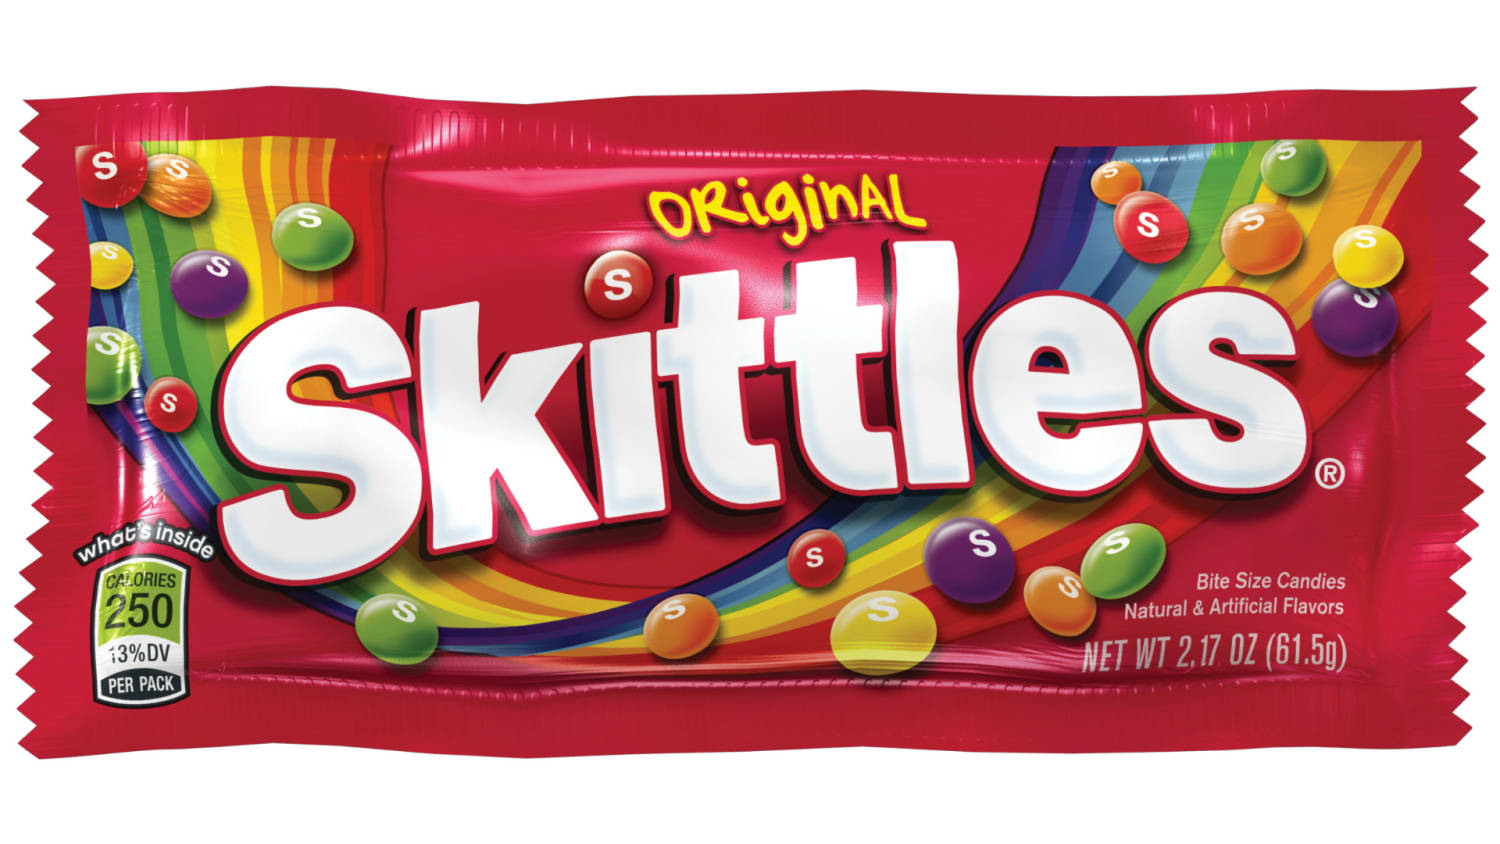 annie patton recommends Picture Of Skittles